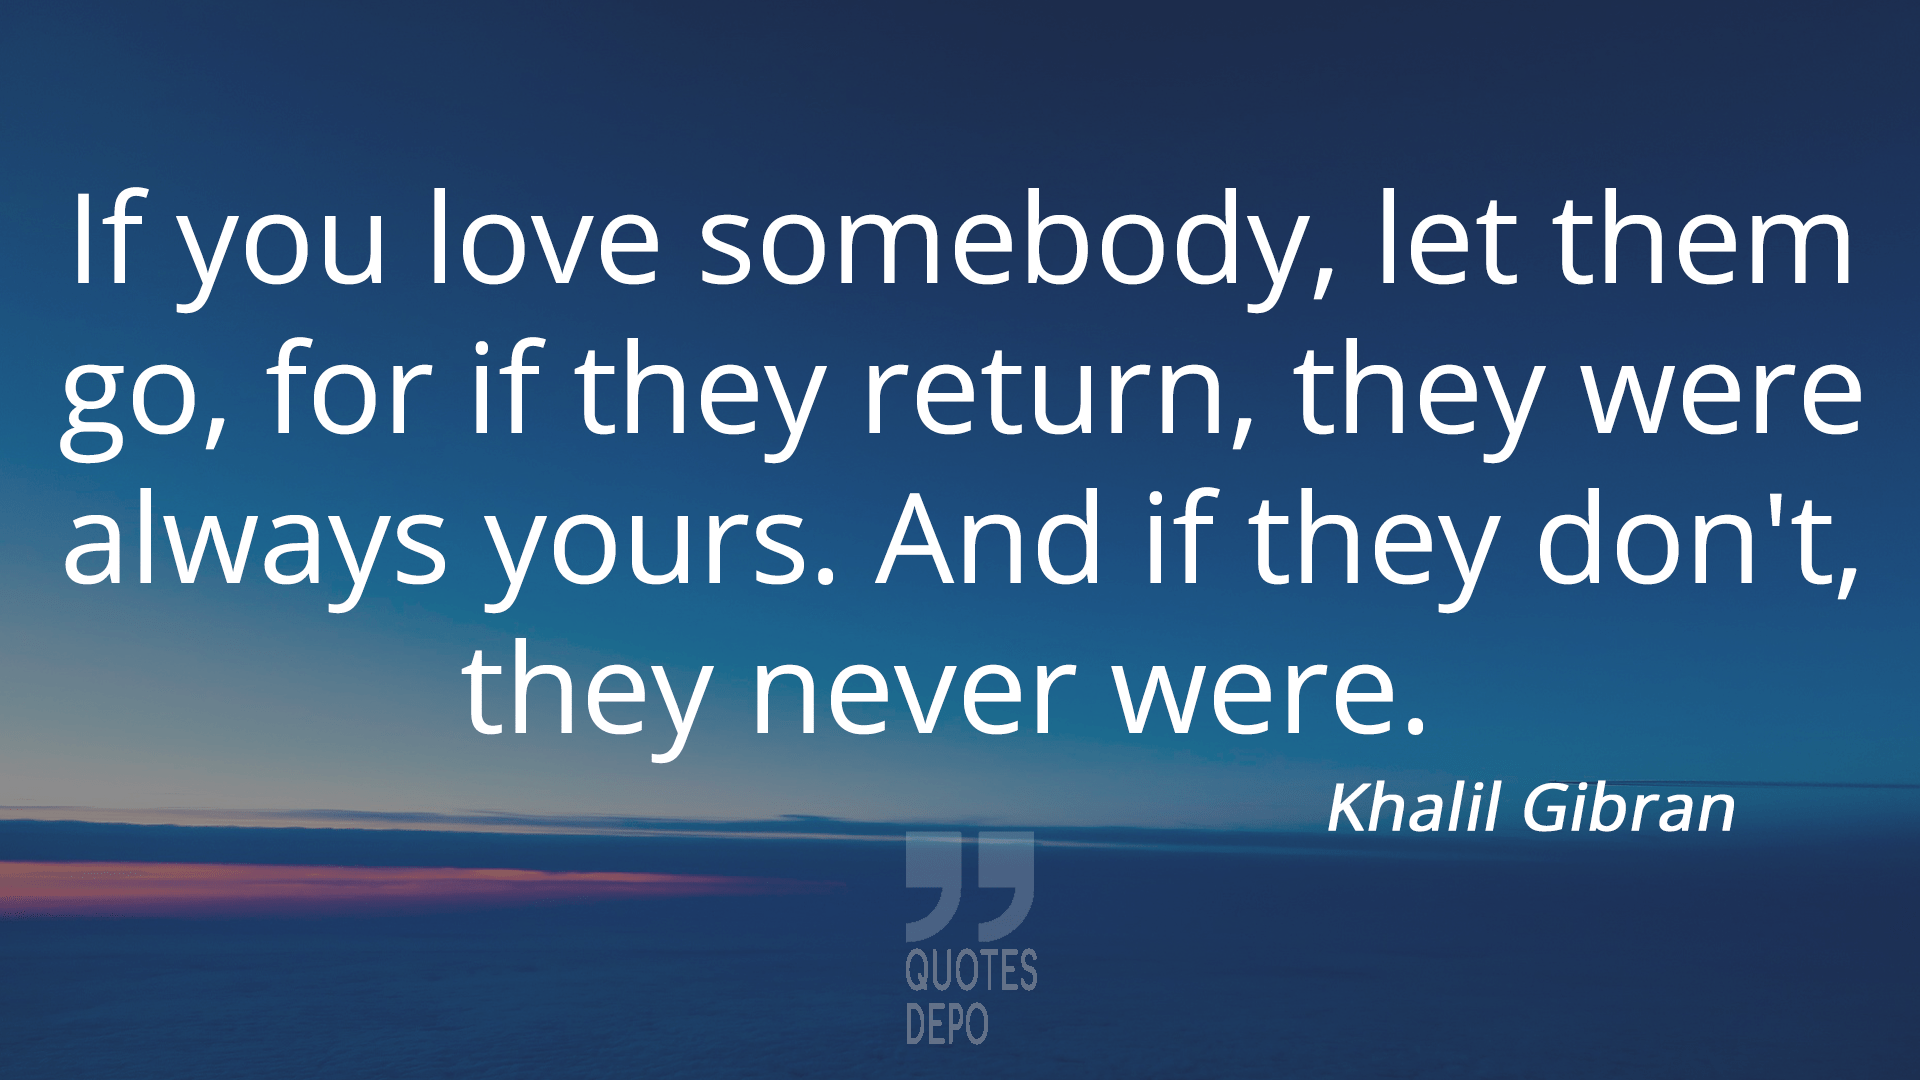 if you love somebody let them go - khalil gibran quotes